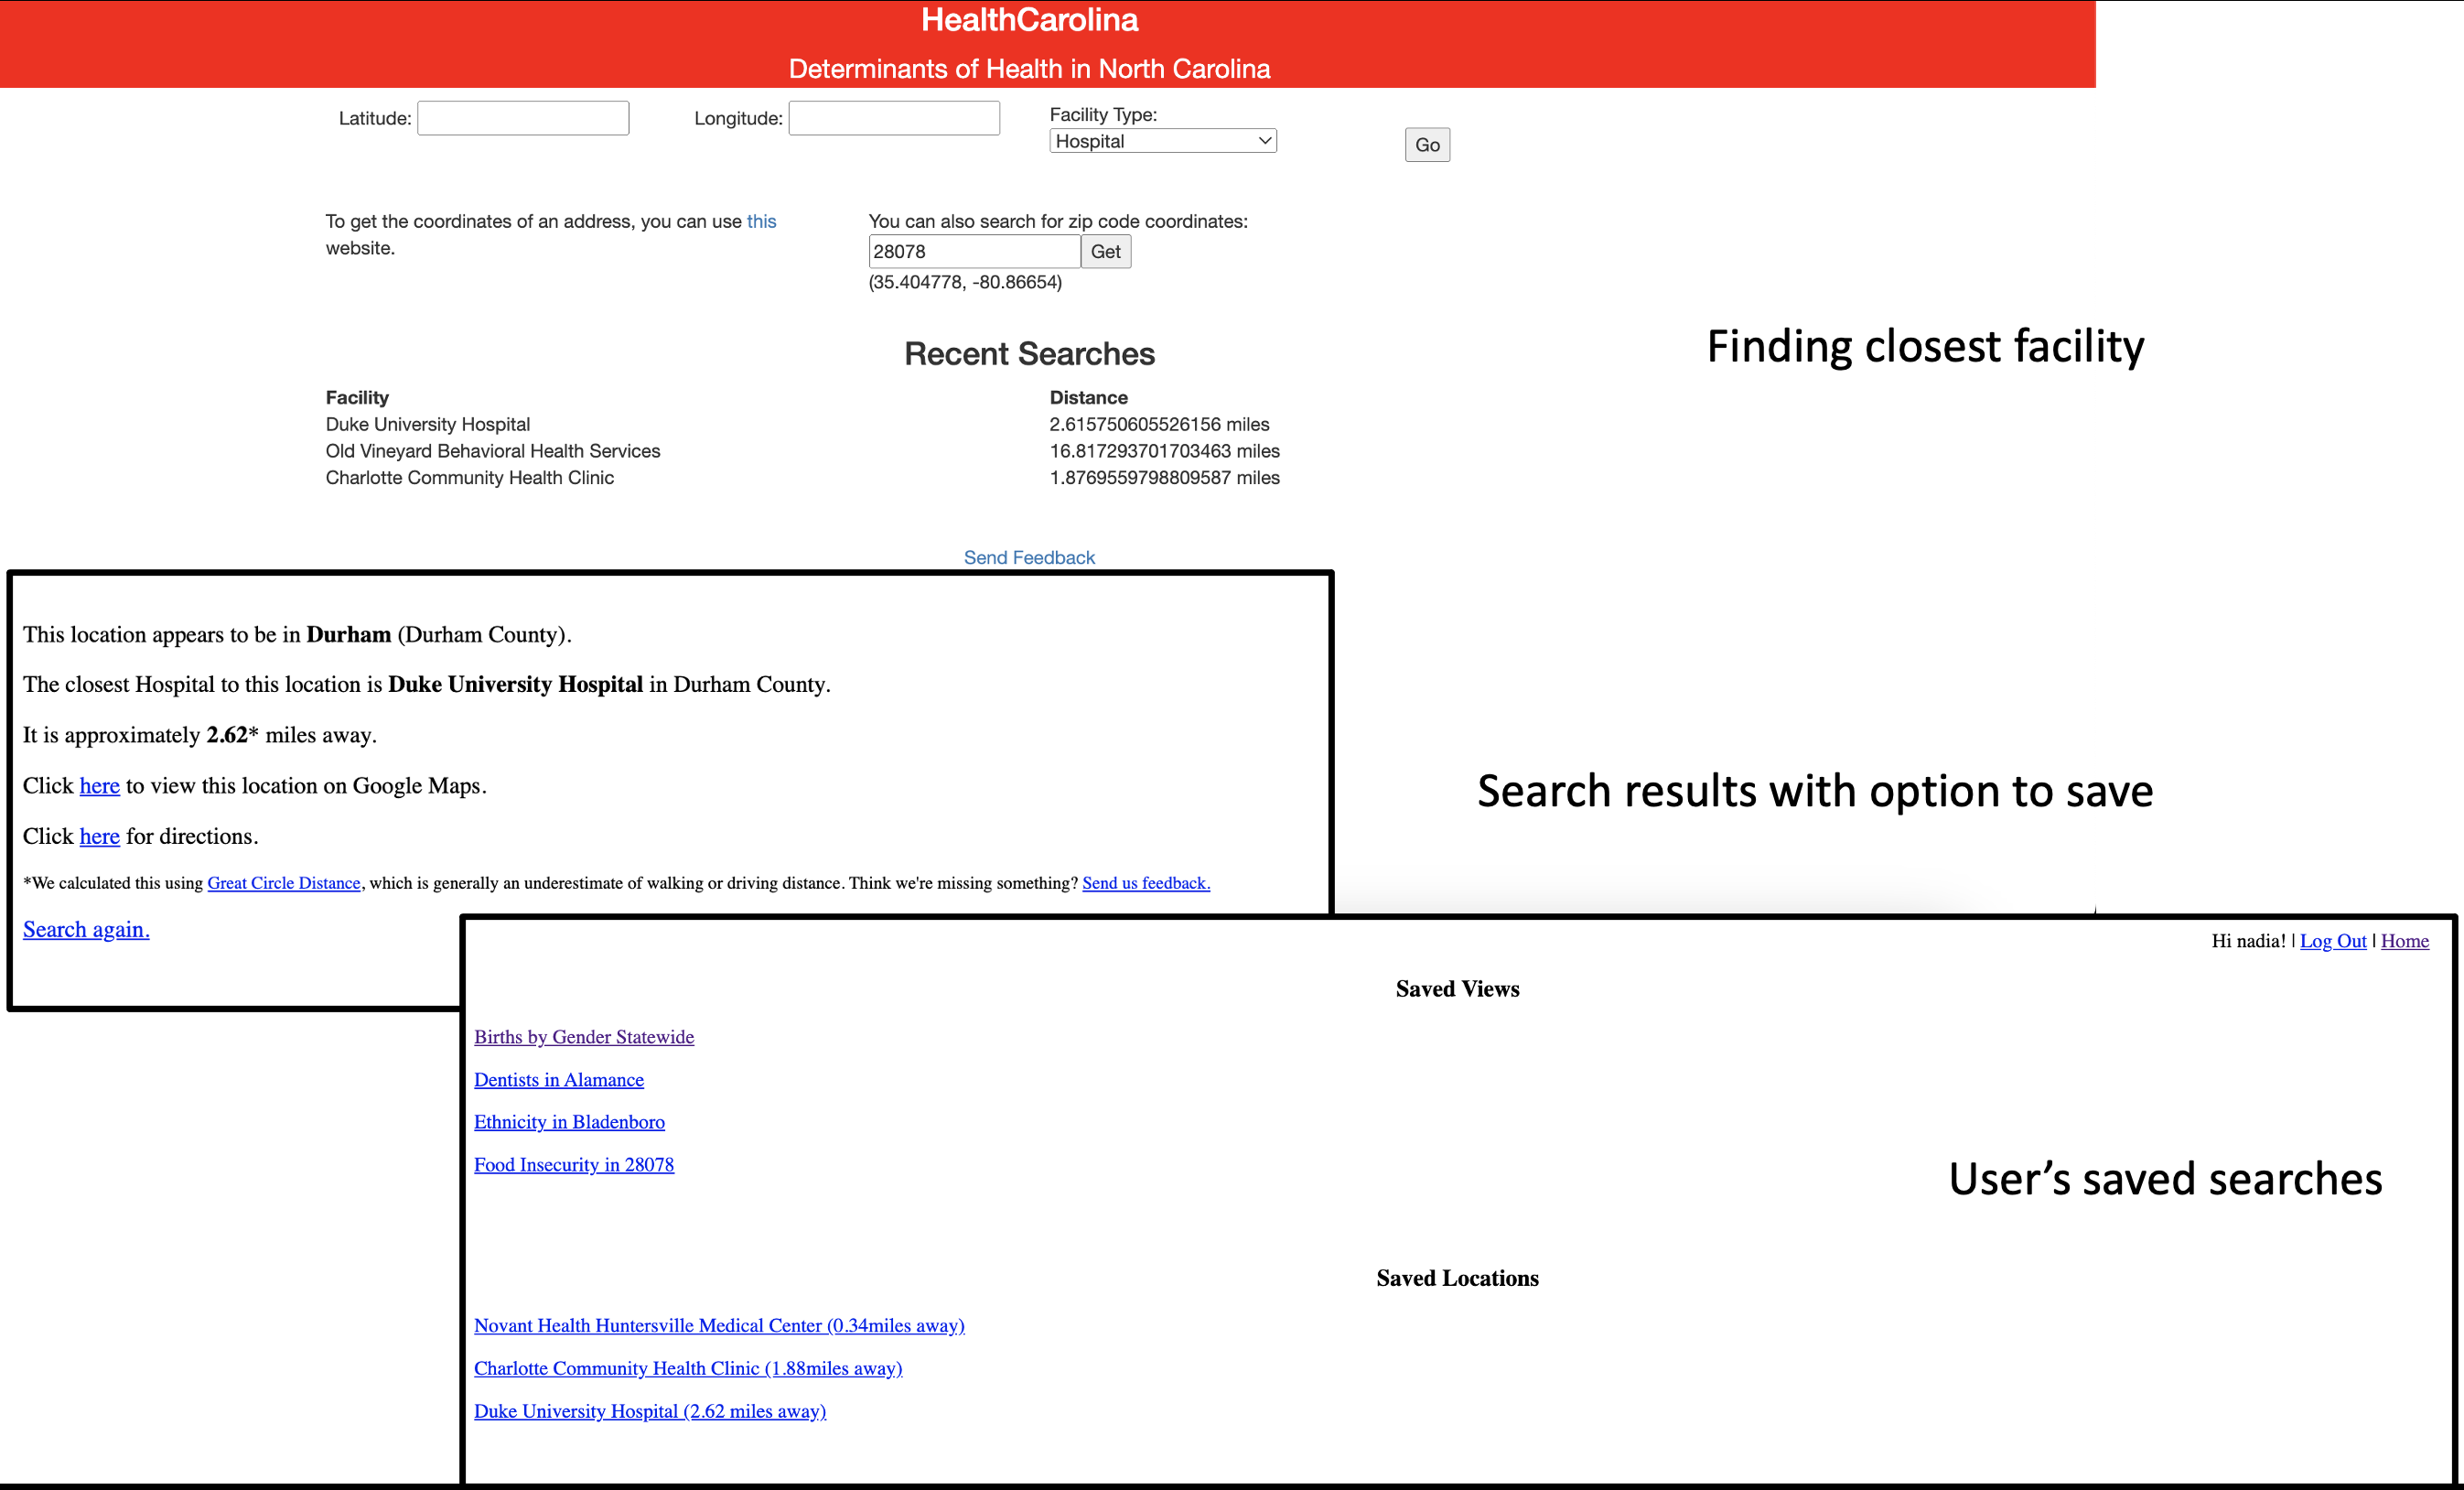 Screenshots showing HealthCarolina's closest health facility functionality, a sample search result showing the distance to Duke University Hospital with links to directions, and user's saved search results.